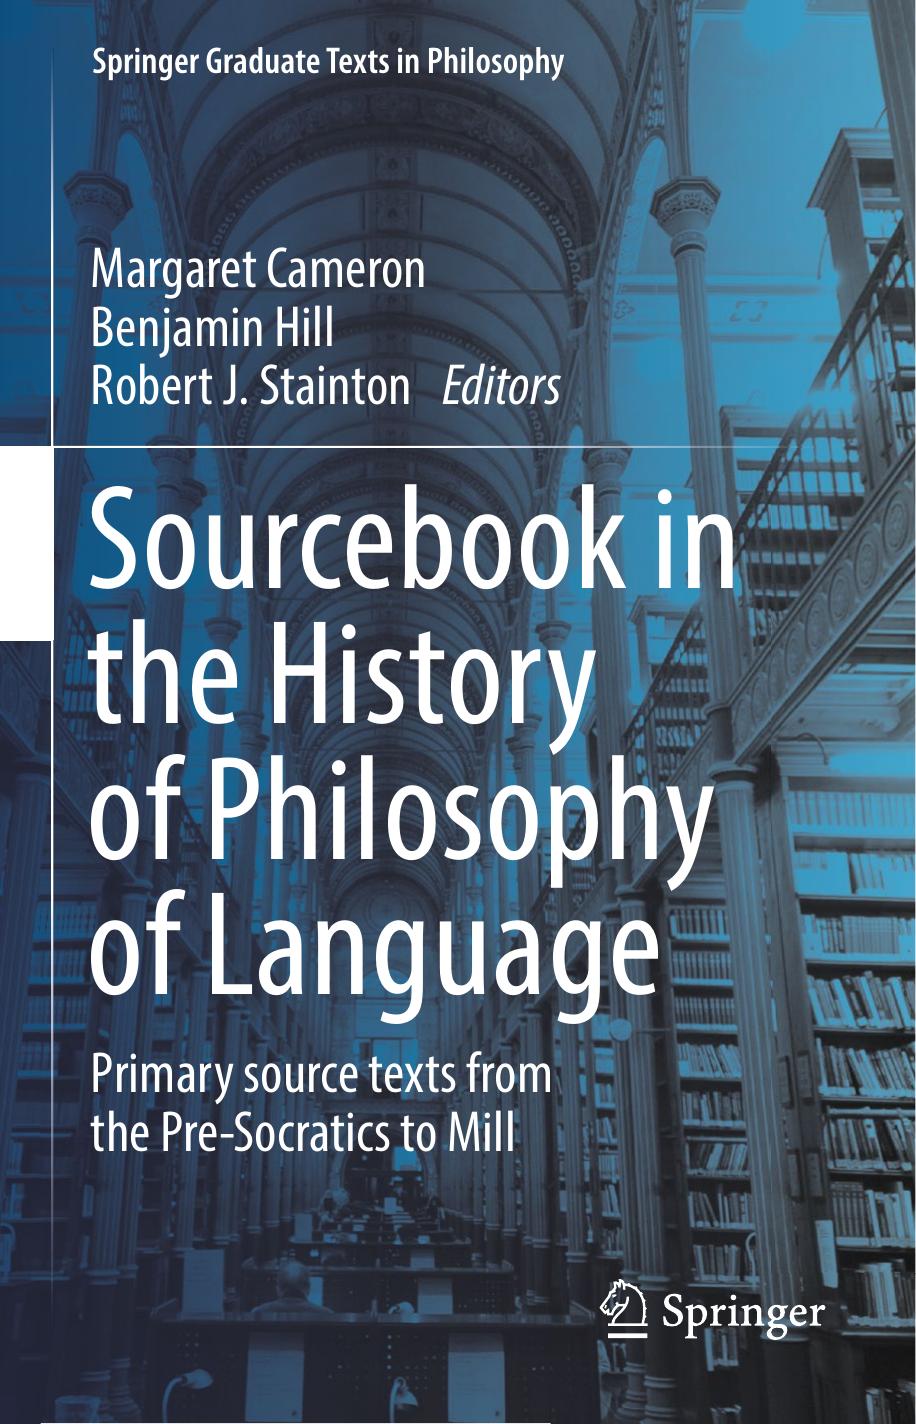 Sourcebook in the History of Philosophy of Language: Primary Source Texts From the Pre-Socratics to Mill